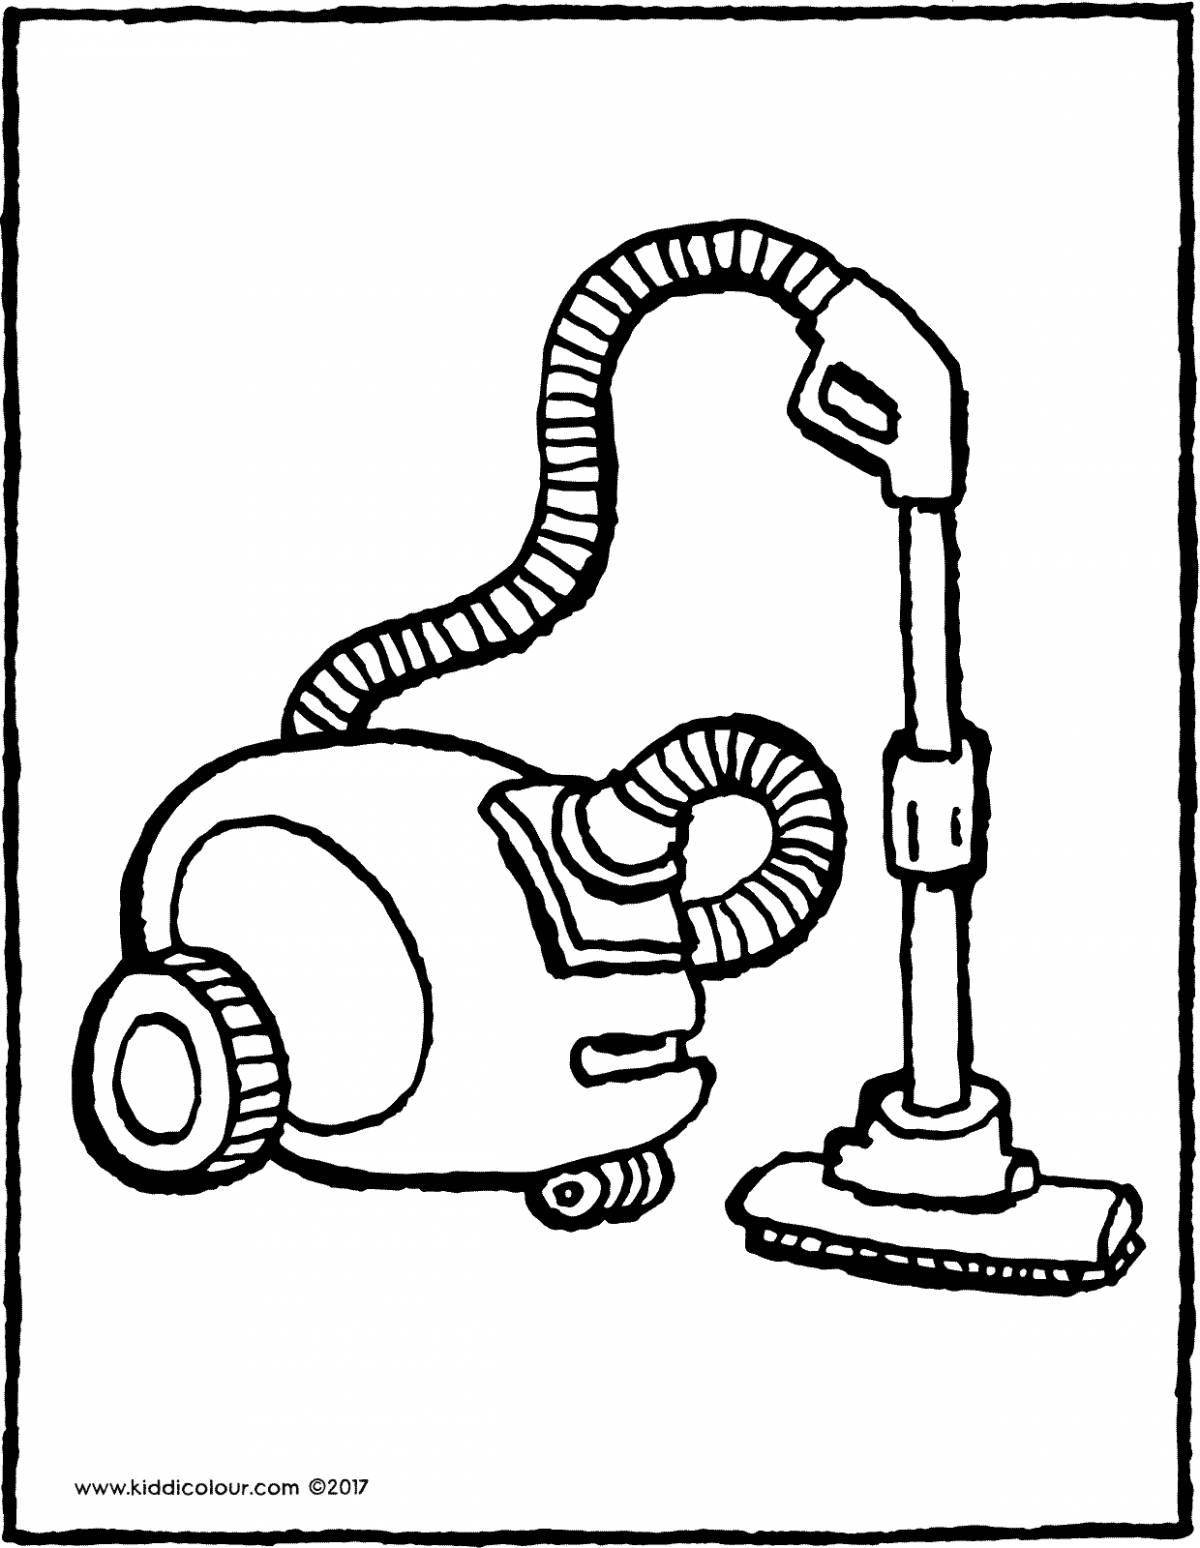 Coloring page fascinating electrical devices